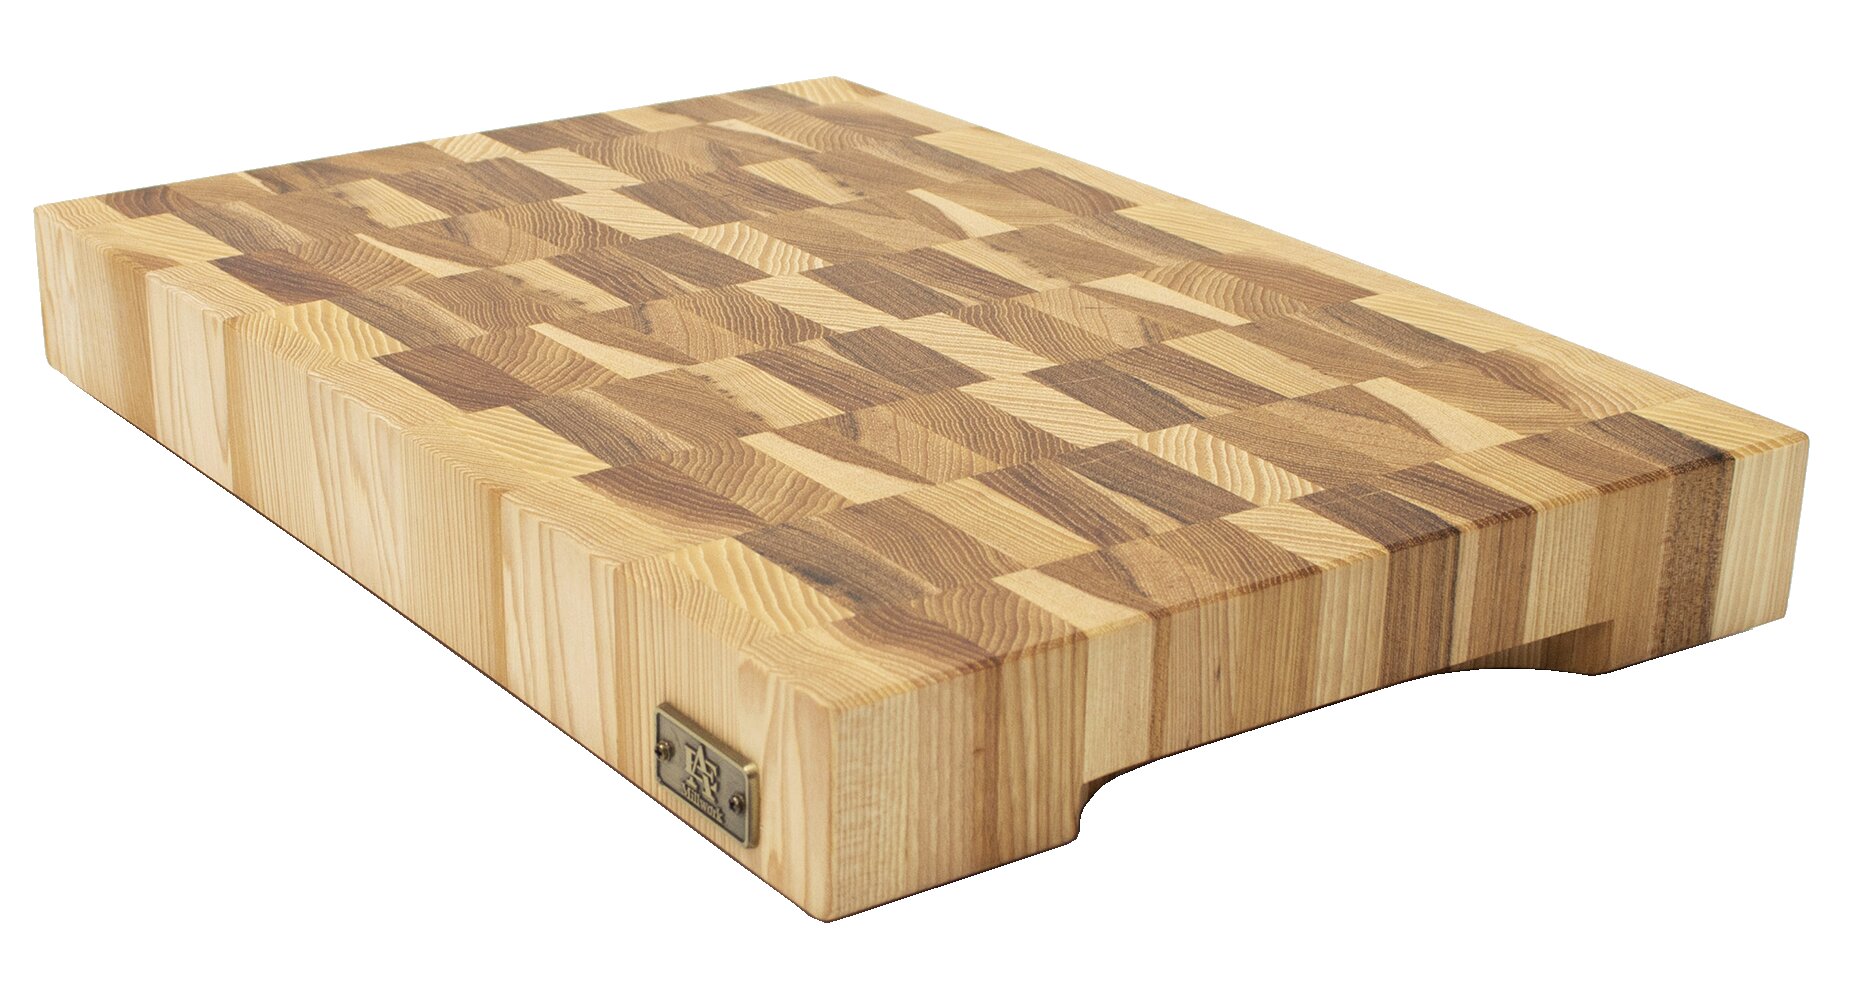 Is Hickory the Best Wood Choice for Cutting Boards?